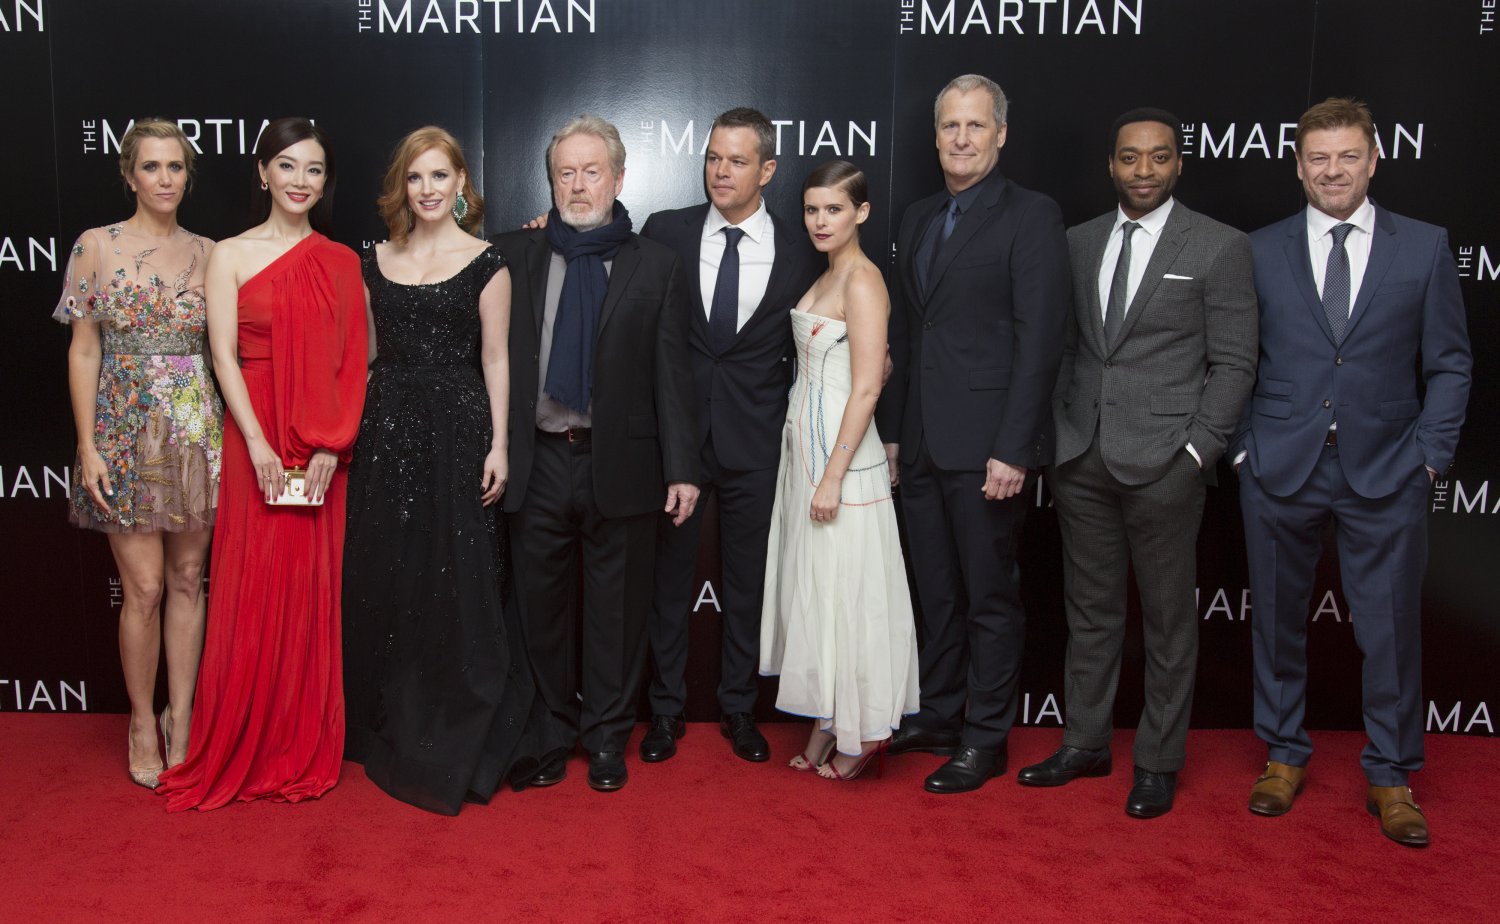 The Martian – cast and director